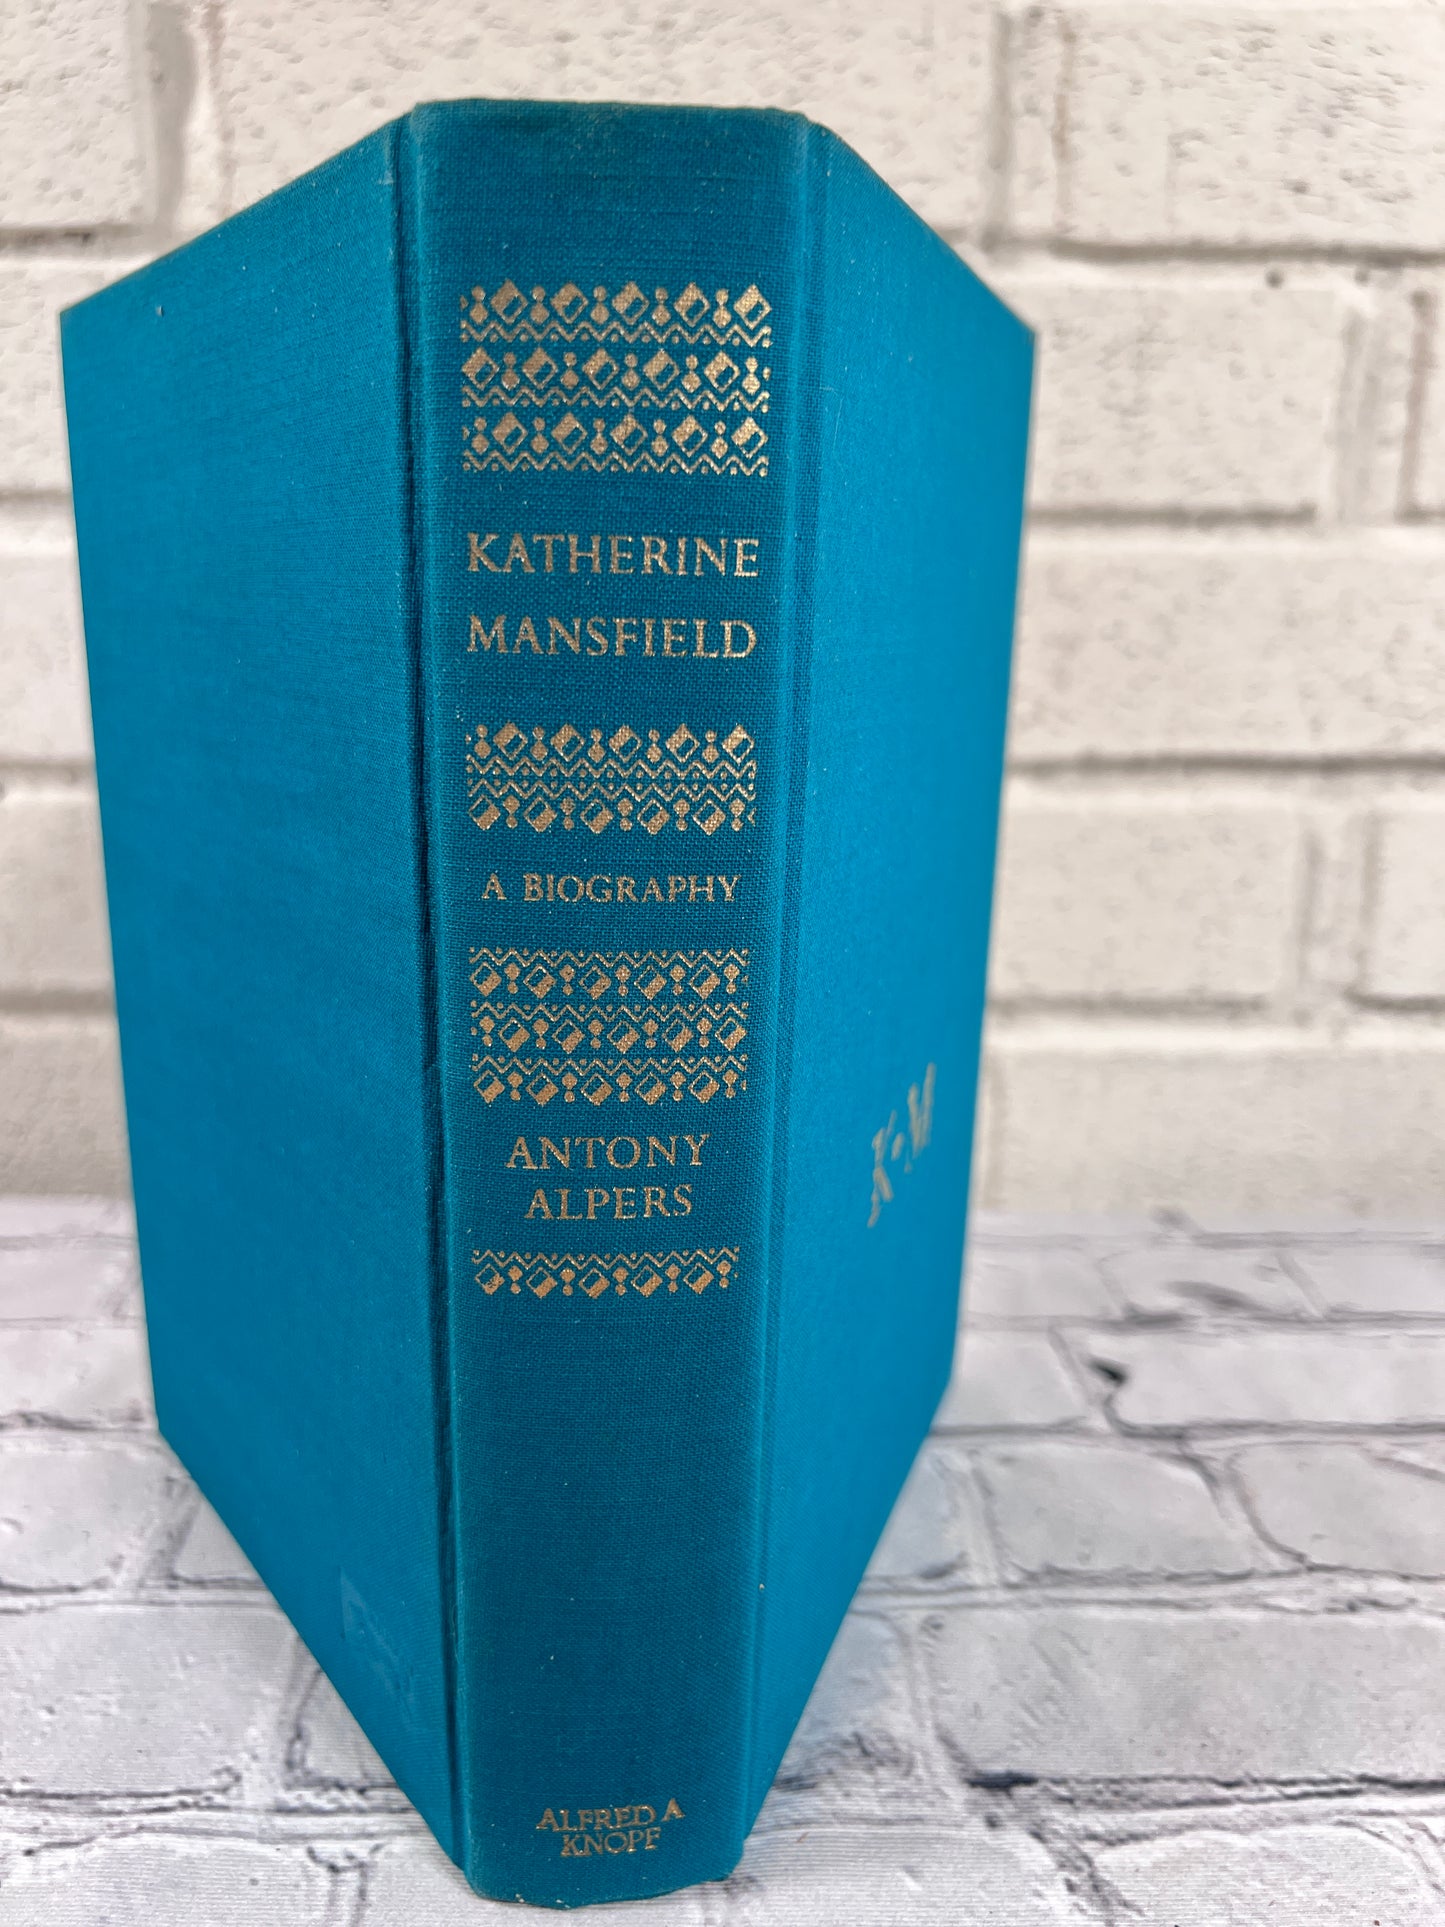 Katherine Mansfield A Biography by Antony Alpers [1954 · 2nd Printing]